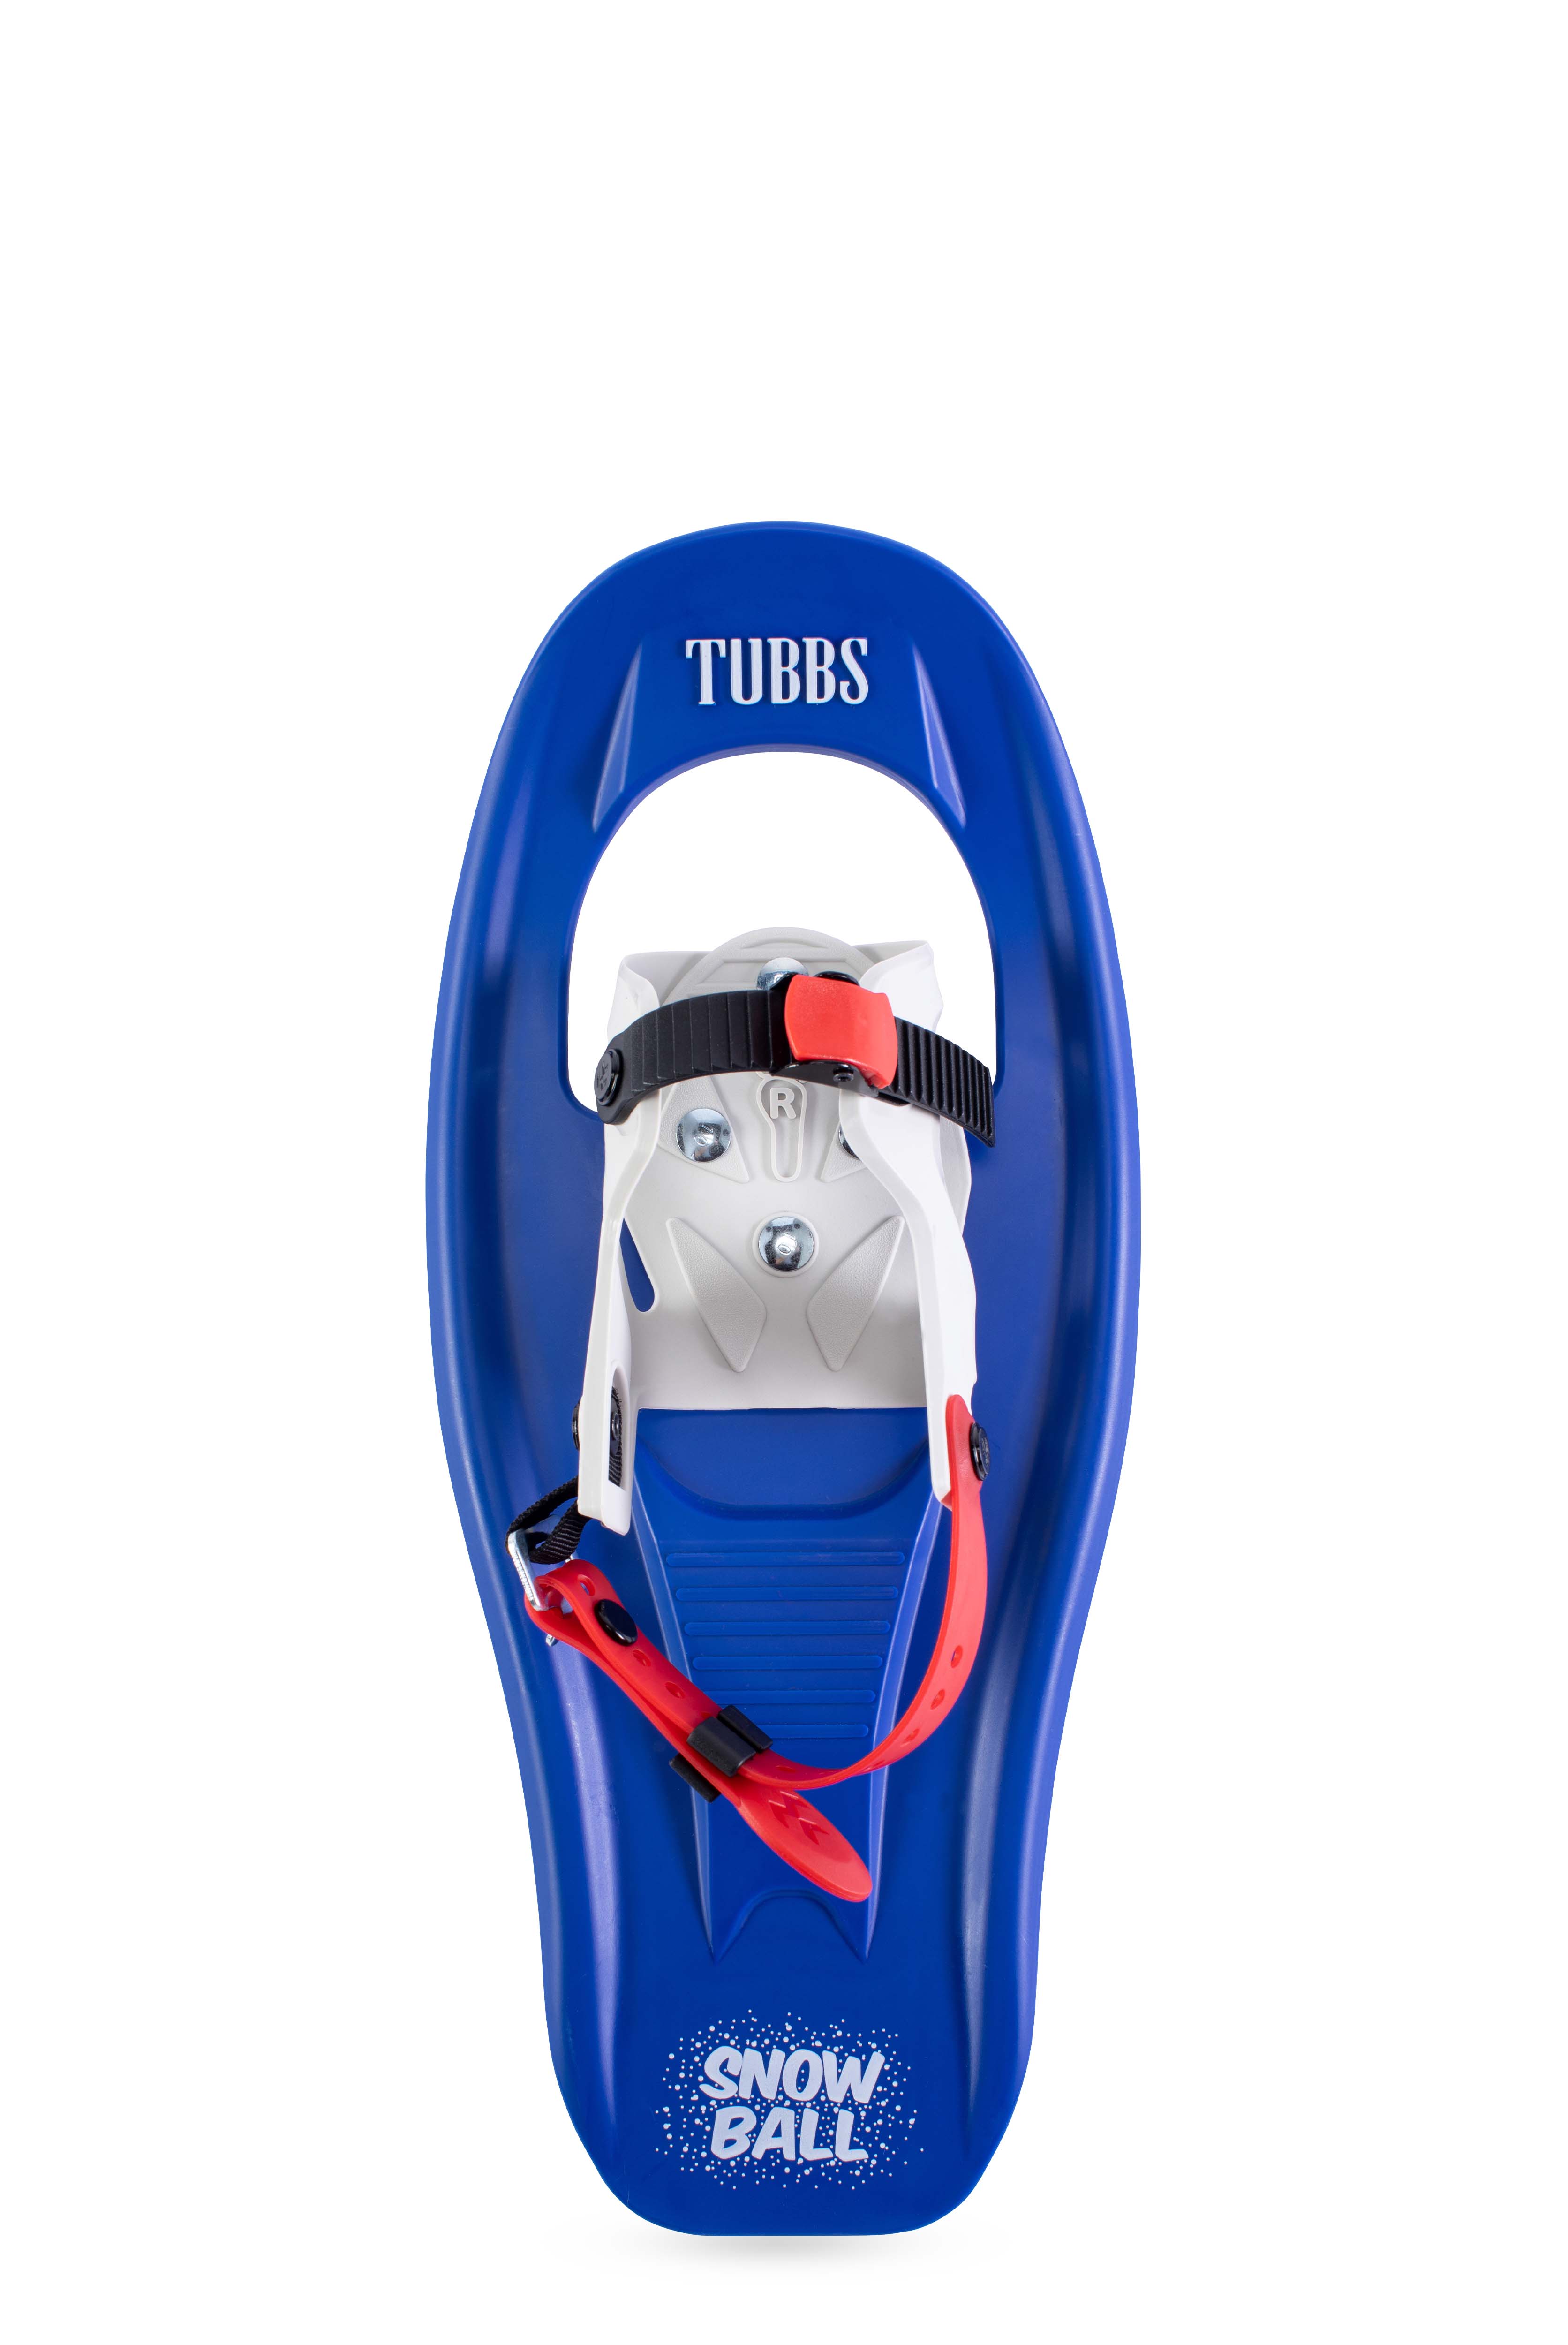 Tubbs Snowball Snowshoes - Kids